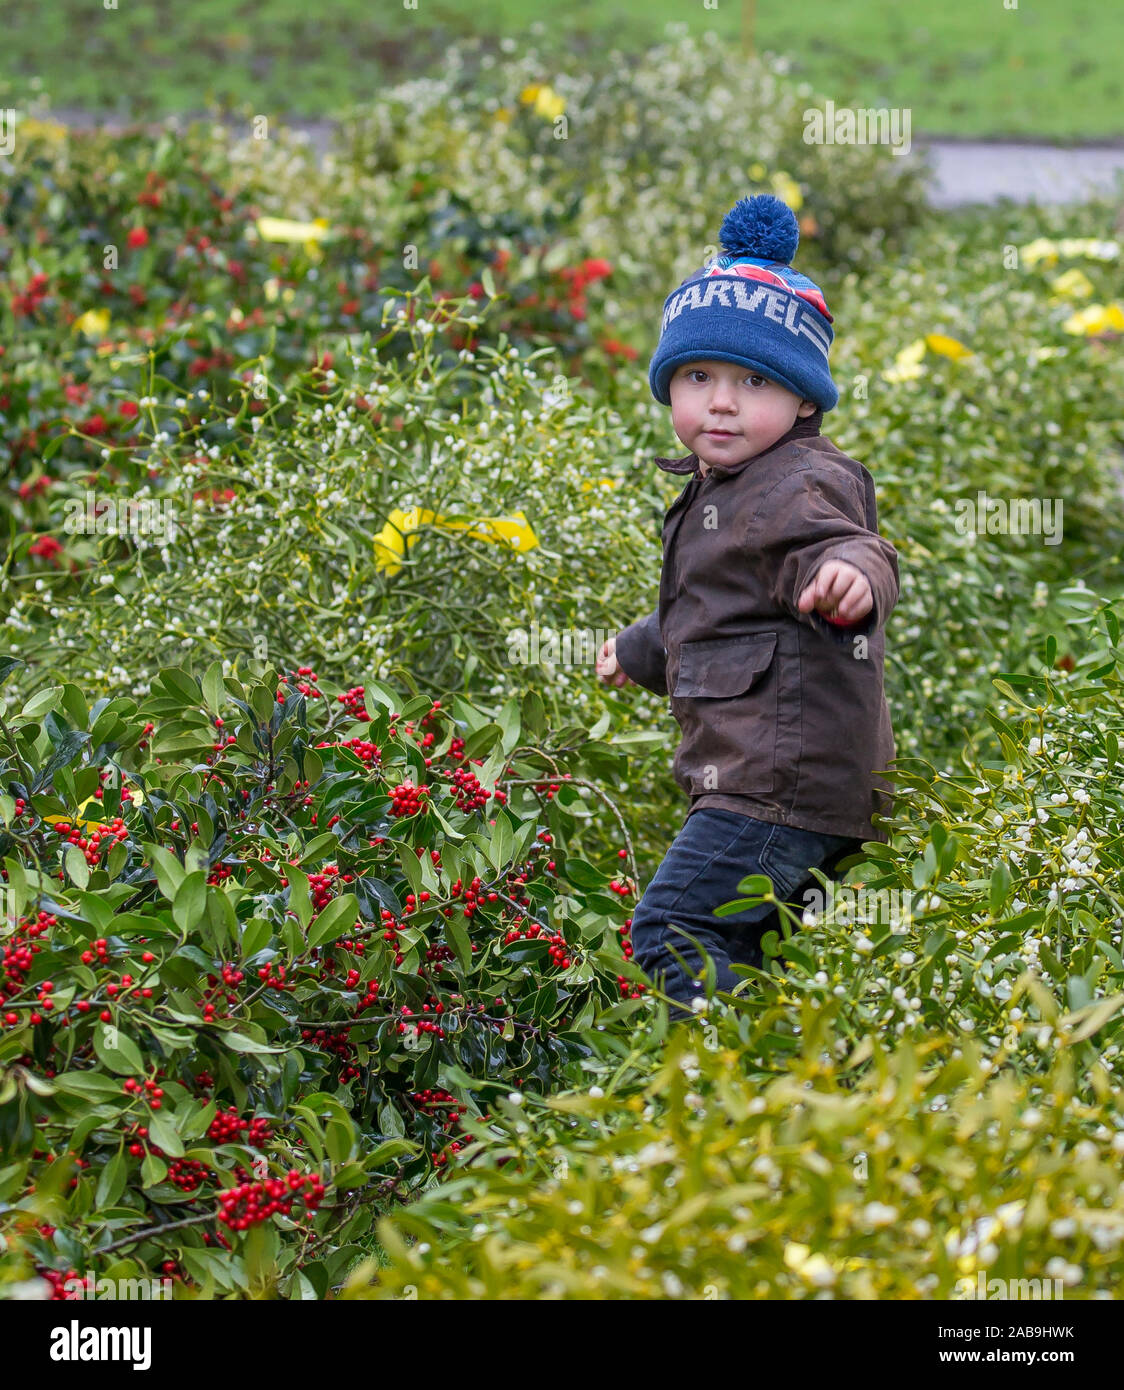 Tenbury Wells, UK. 26th Nov, 2019. In spite of wet, dreary weather, nothing dampens the spirit of UK buyers who flock to the Worcestershire town of Tenbury Wells for the annual Christmas Mistletoe and Holly Auction. With UK growers offering such a staggering selection of freshly-cut, berry-laden evergreens at this special event, retailers travel from far and wide to secure the finest festive foliage for the countdown to Christmas. Whilst waiting for his father, this little boy, Bobby-Lee, is having so much fun running around and hiding in rows of evergreens! Credit: Lee Hudson/Alamy Live News Stock Photo